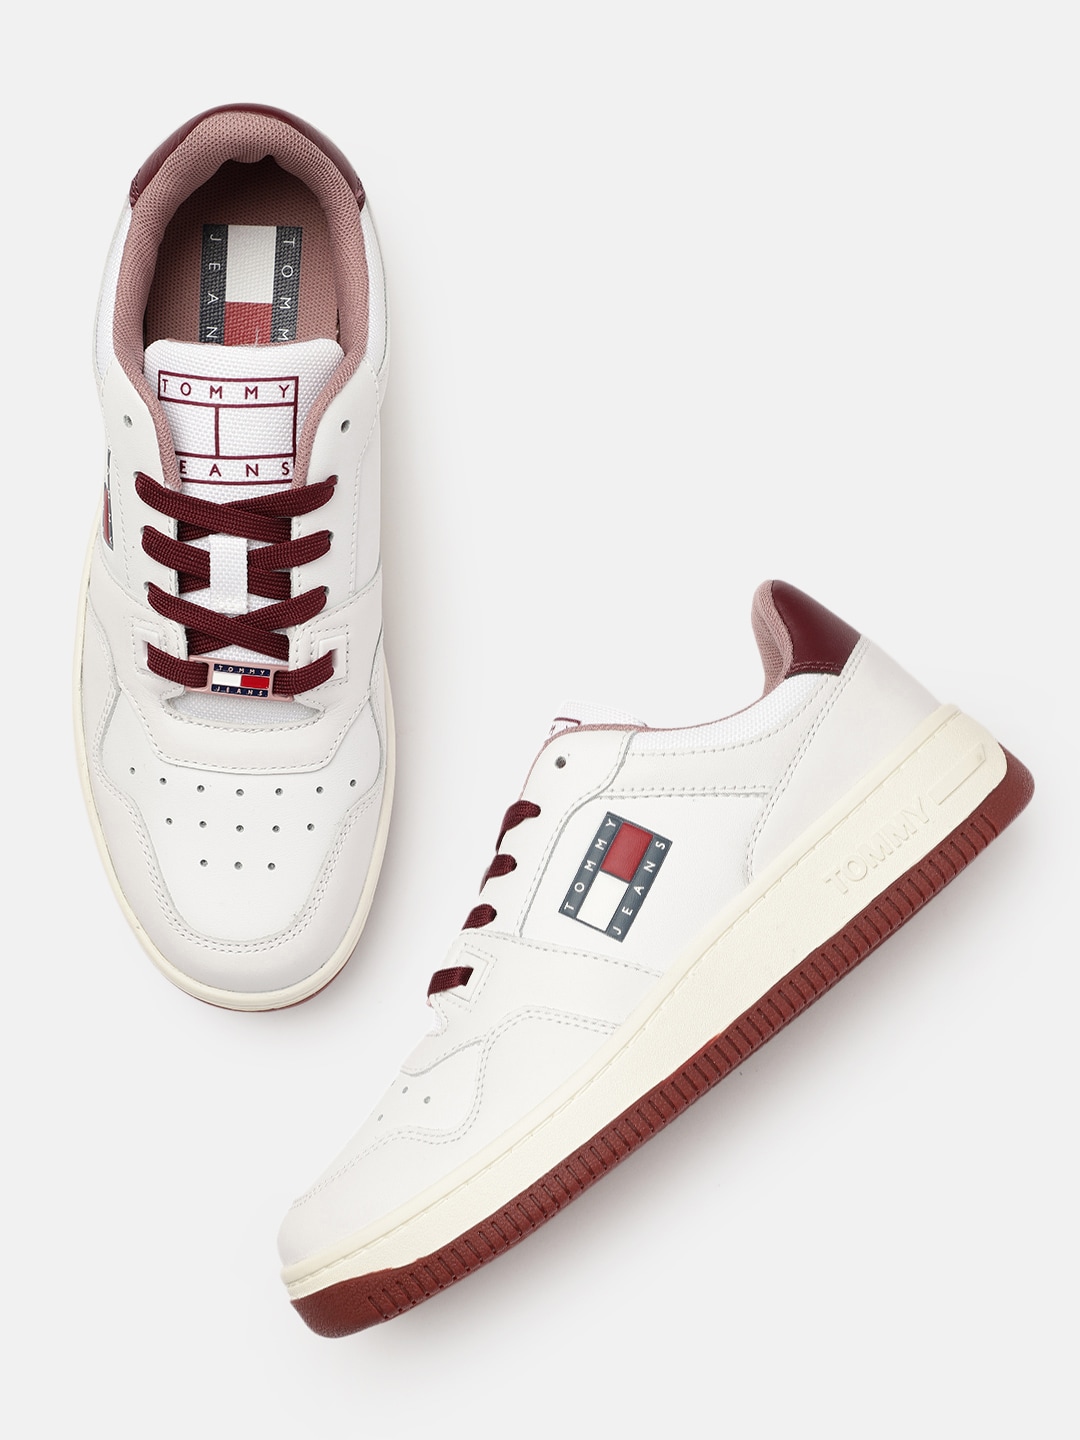 Tommy Hilfiger Women White Perforated Leather Sneakers Price in India